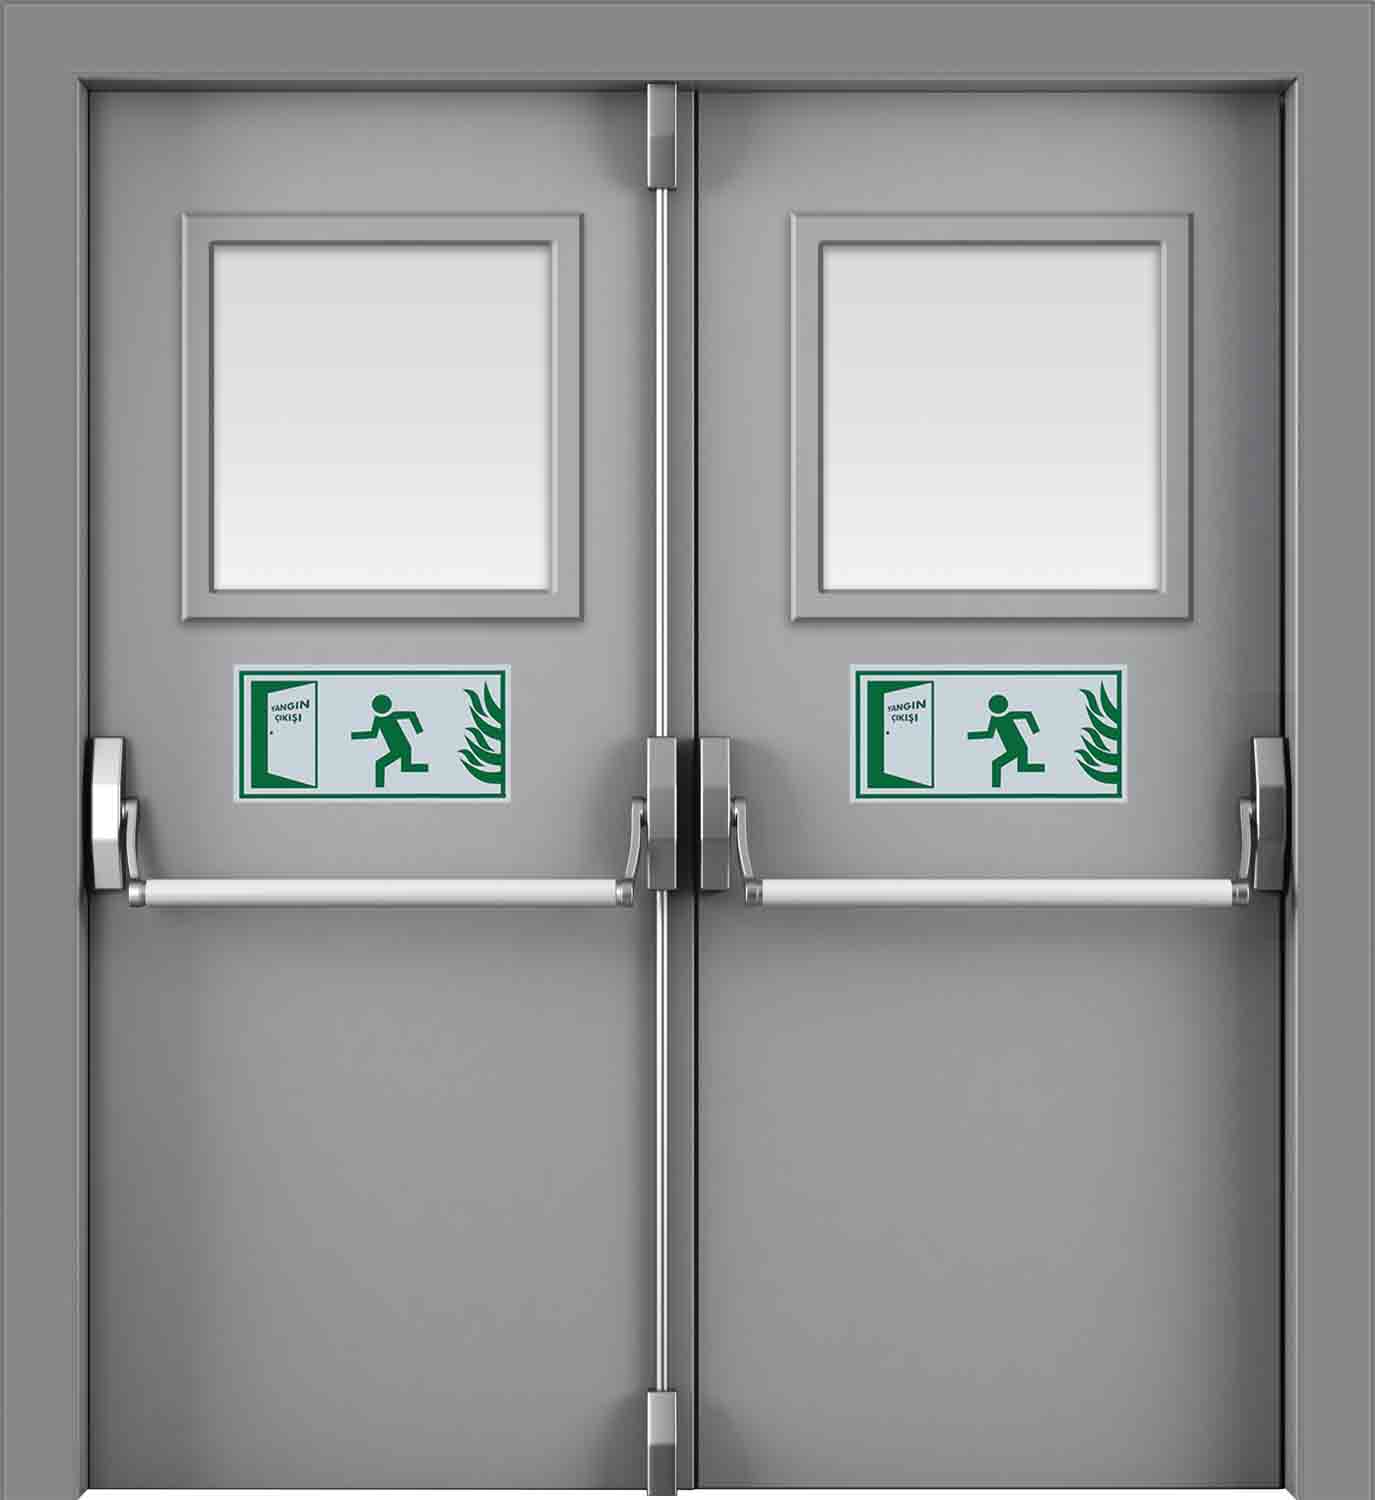 Fire door with panic bar resistant to 120 minutes